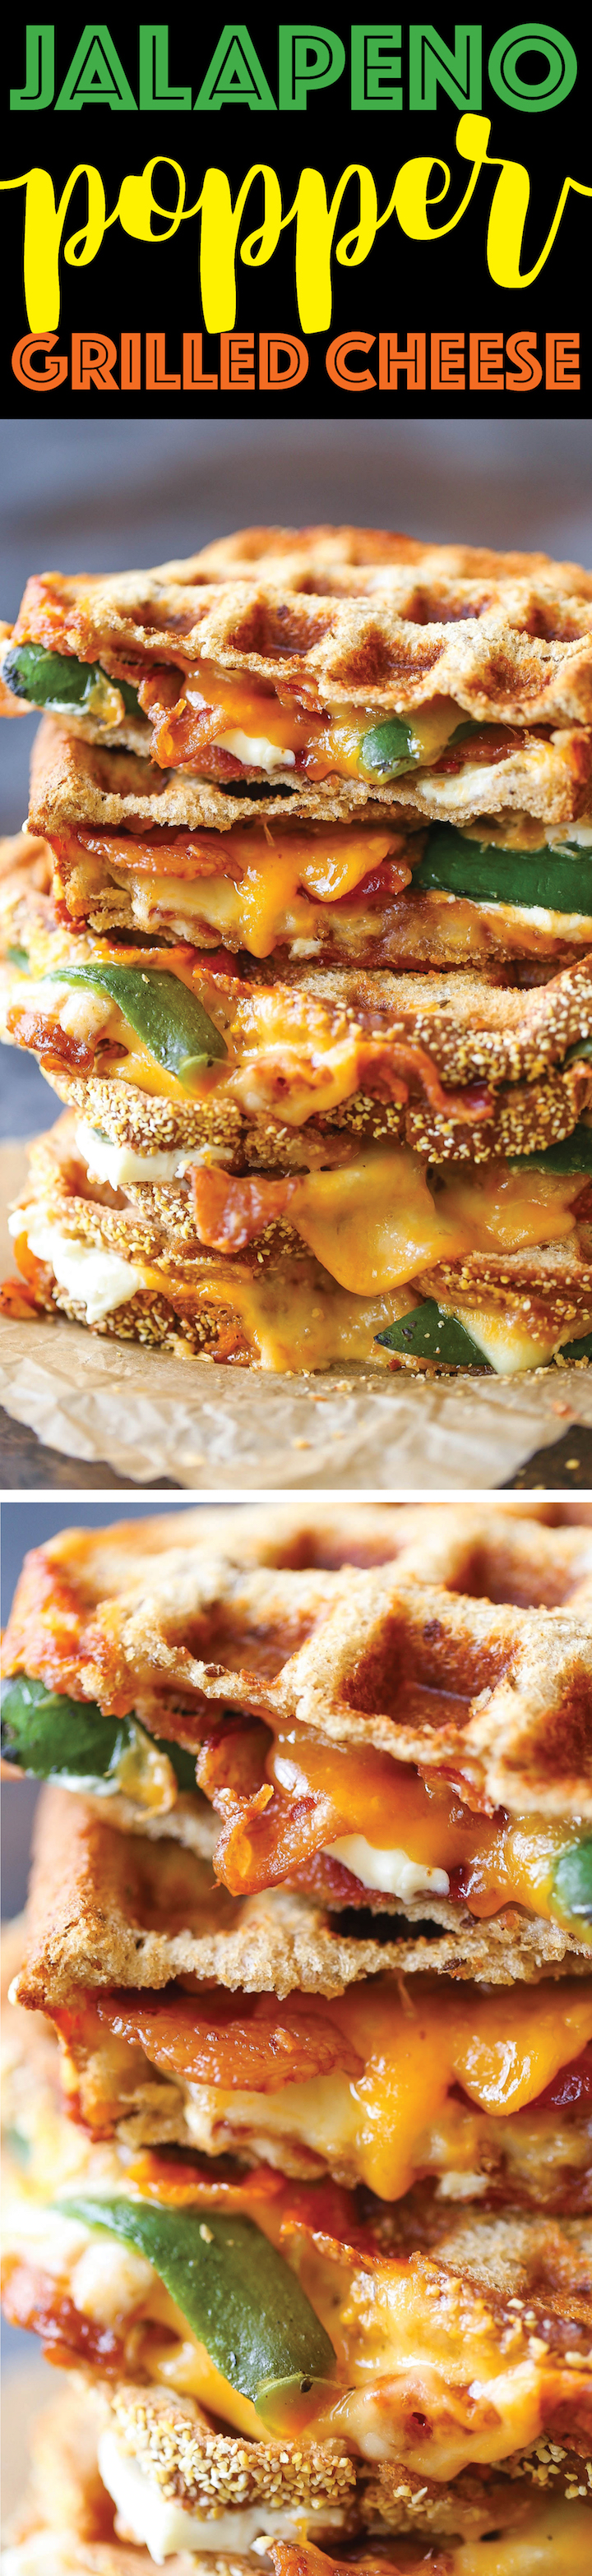 Jalapeño Popper Grilled Cheese - Everyone's favorite jalapeño poppers made into the most epic grilled cheese. Made in a waffle maker! EASY and no mess!